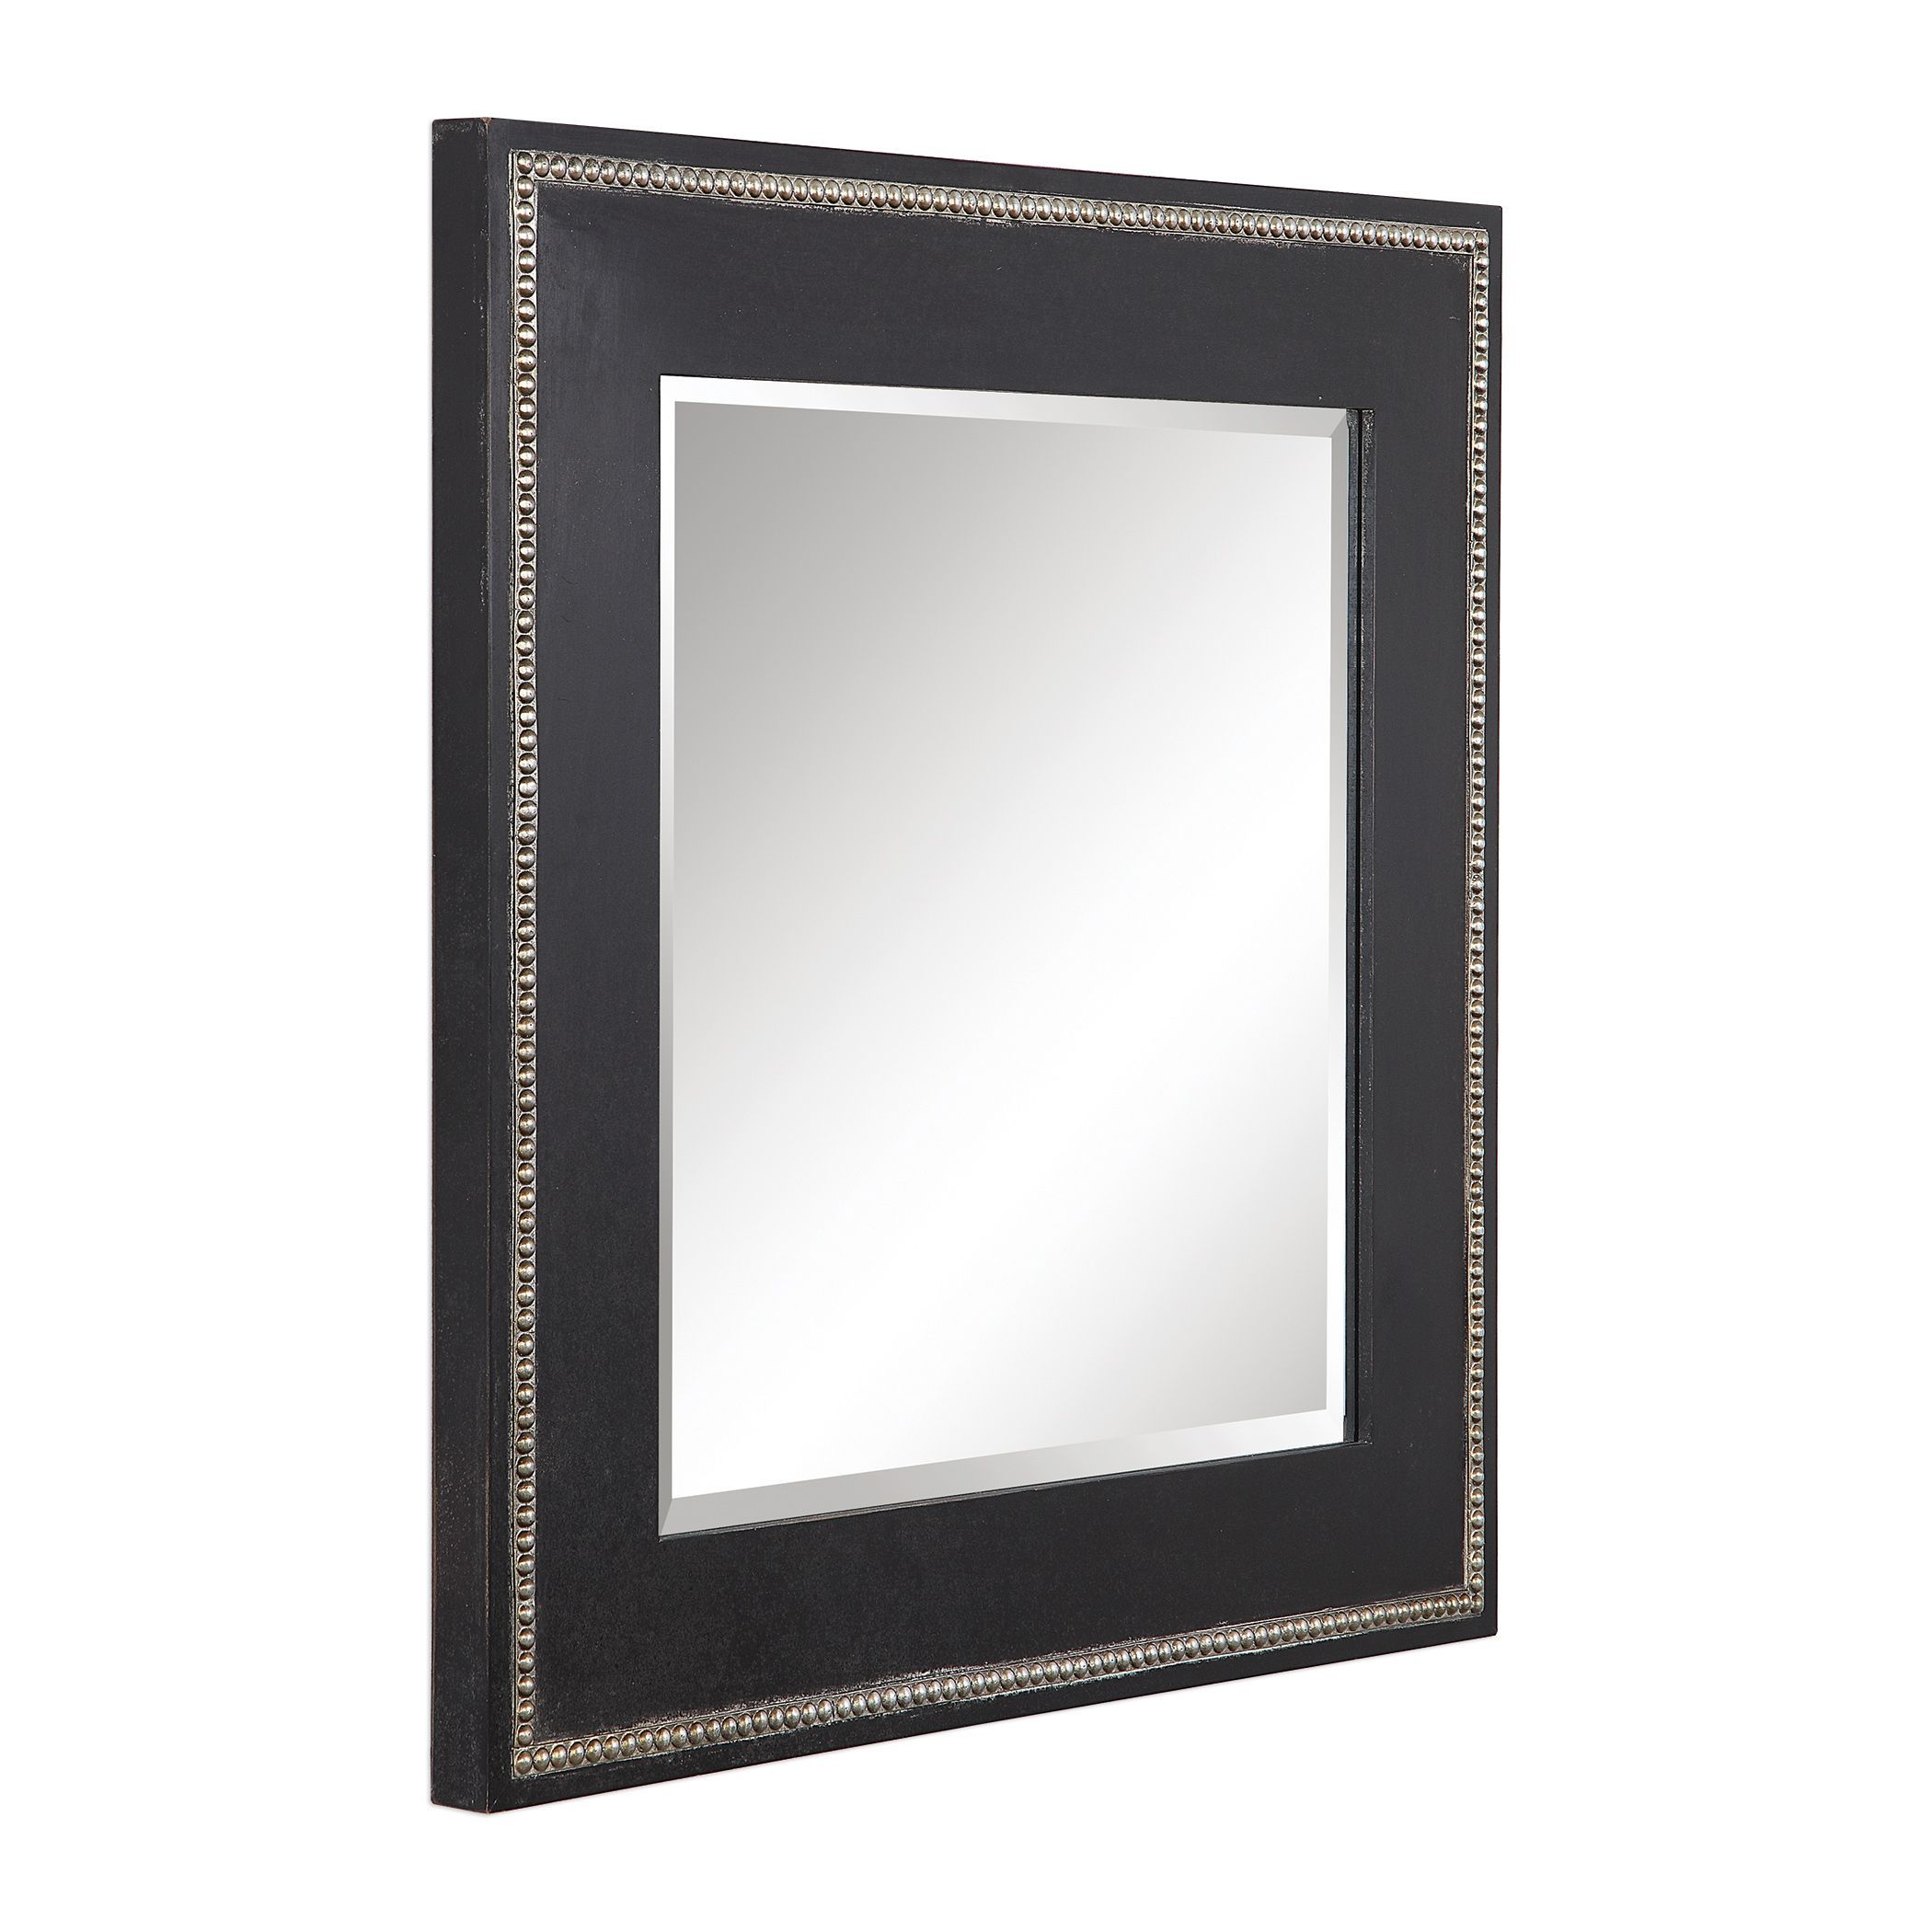 Large Black Square Beveled Wall Mirror Contemporary Style Traditional Intended For Square Oversized Wall Mirrors (View 11 of 15)